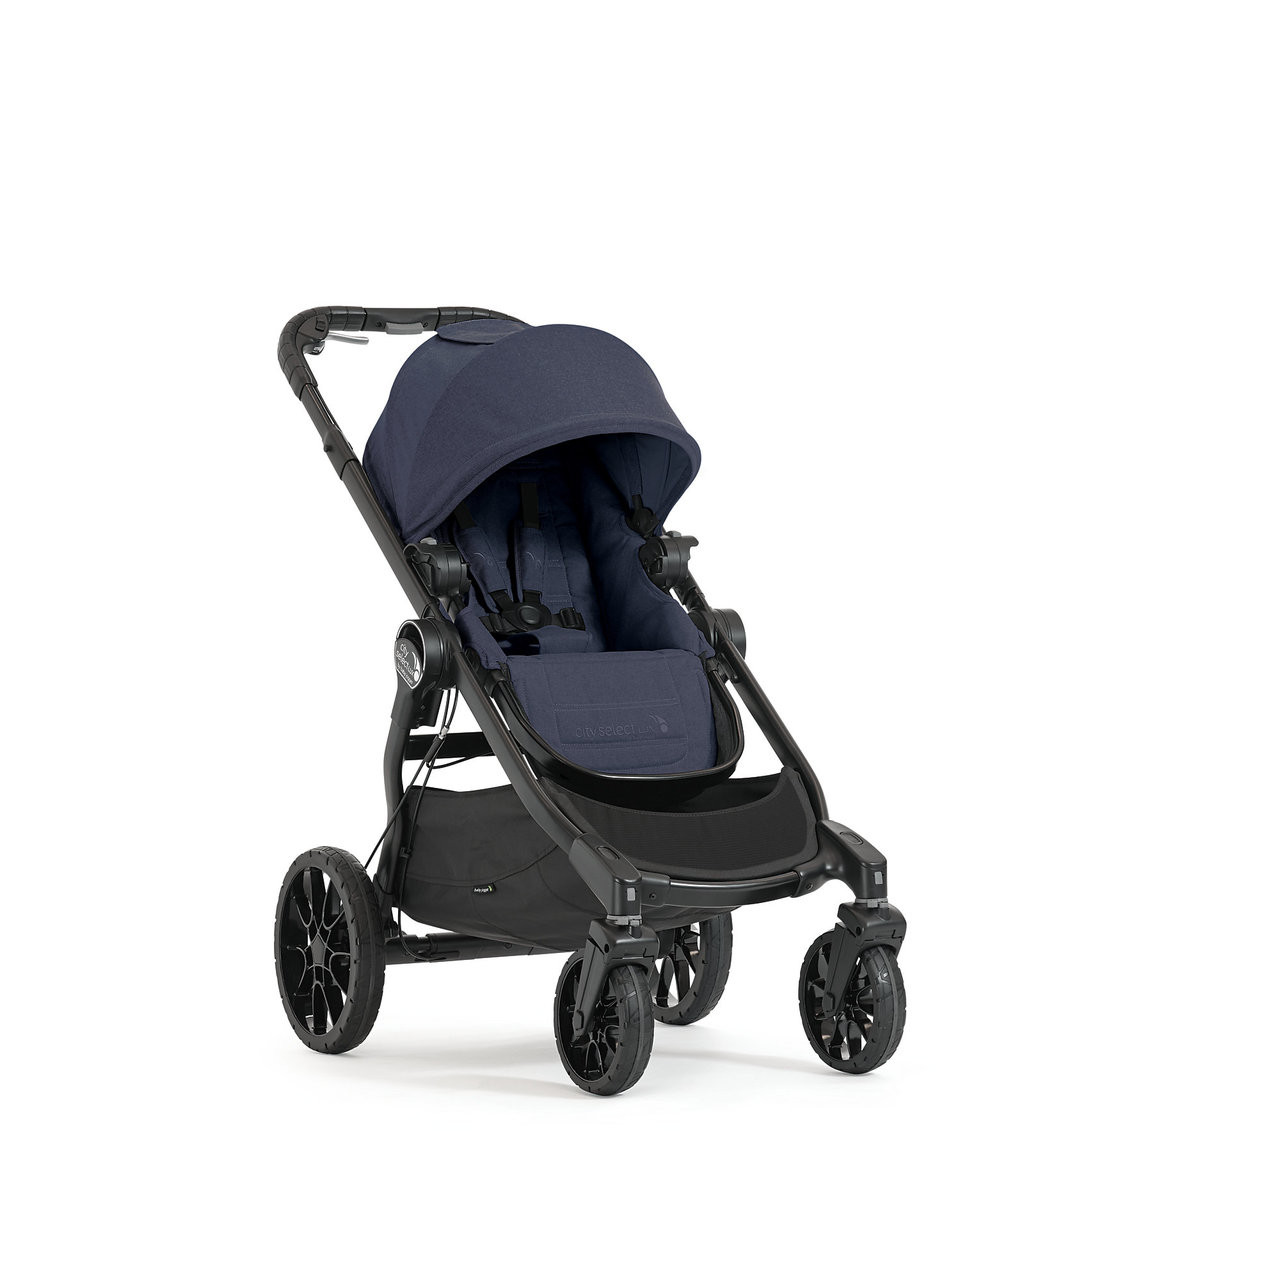 Baby Jogger City Select LUX Stroller Baby Stroller With 20 Ways To Ride,  Goes From Single To Double Stroller Quick Fold Stroller, Port Single Port, Baby Jogger City Lux Double Stroller